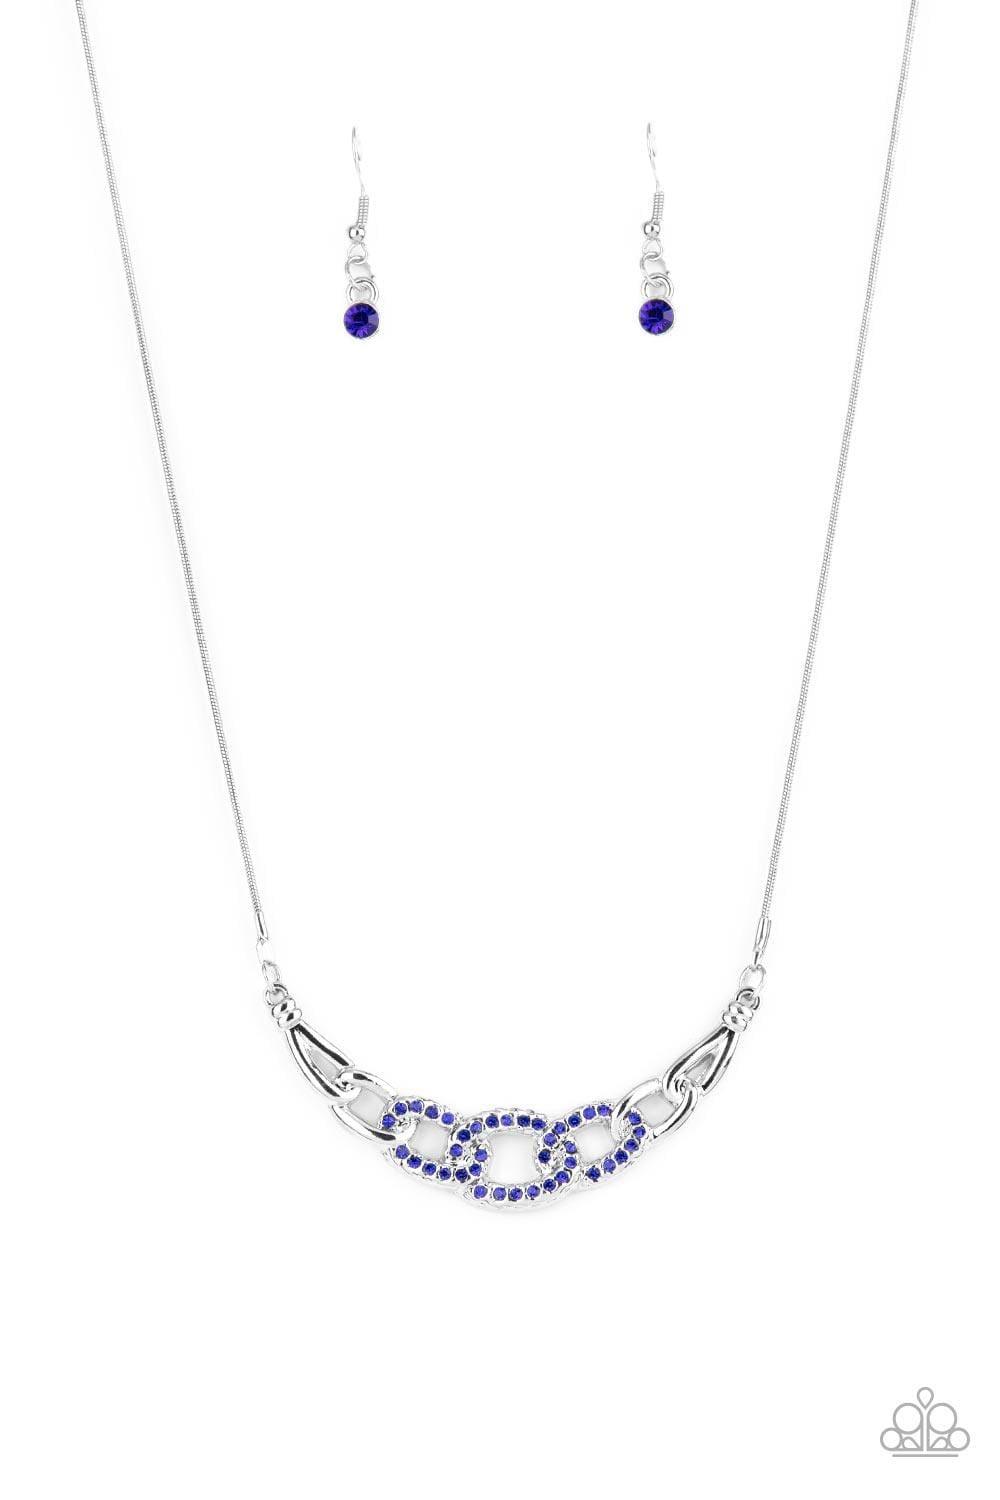 Paparazzi Accessories - Knot In Love - Blue Dainty Necklace - Bling by JessieK